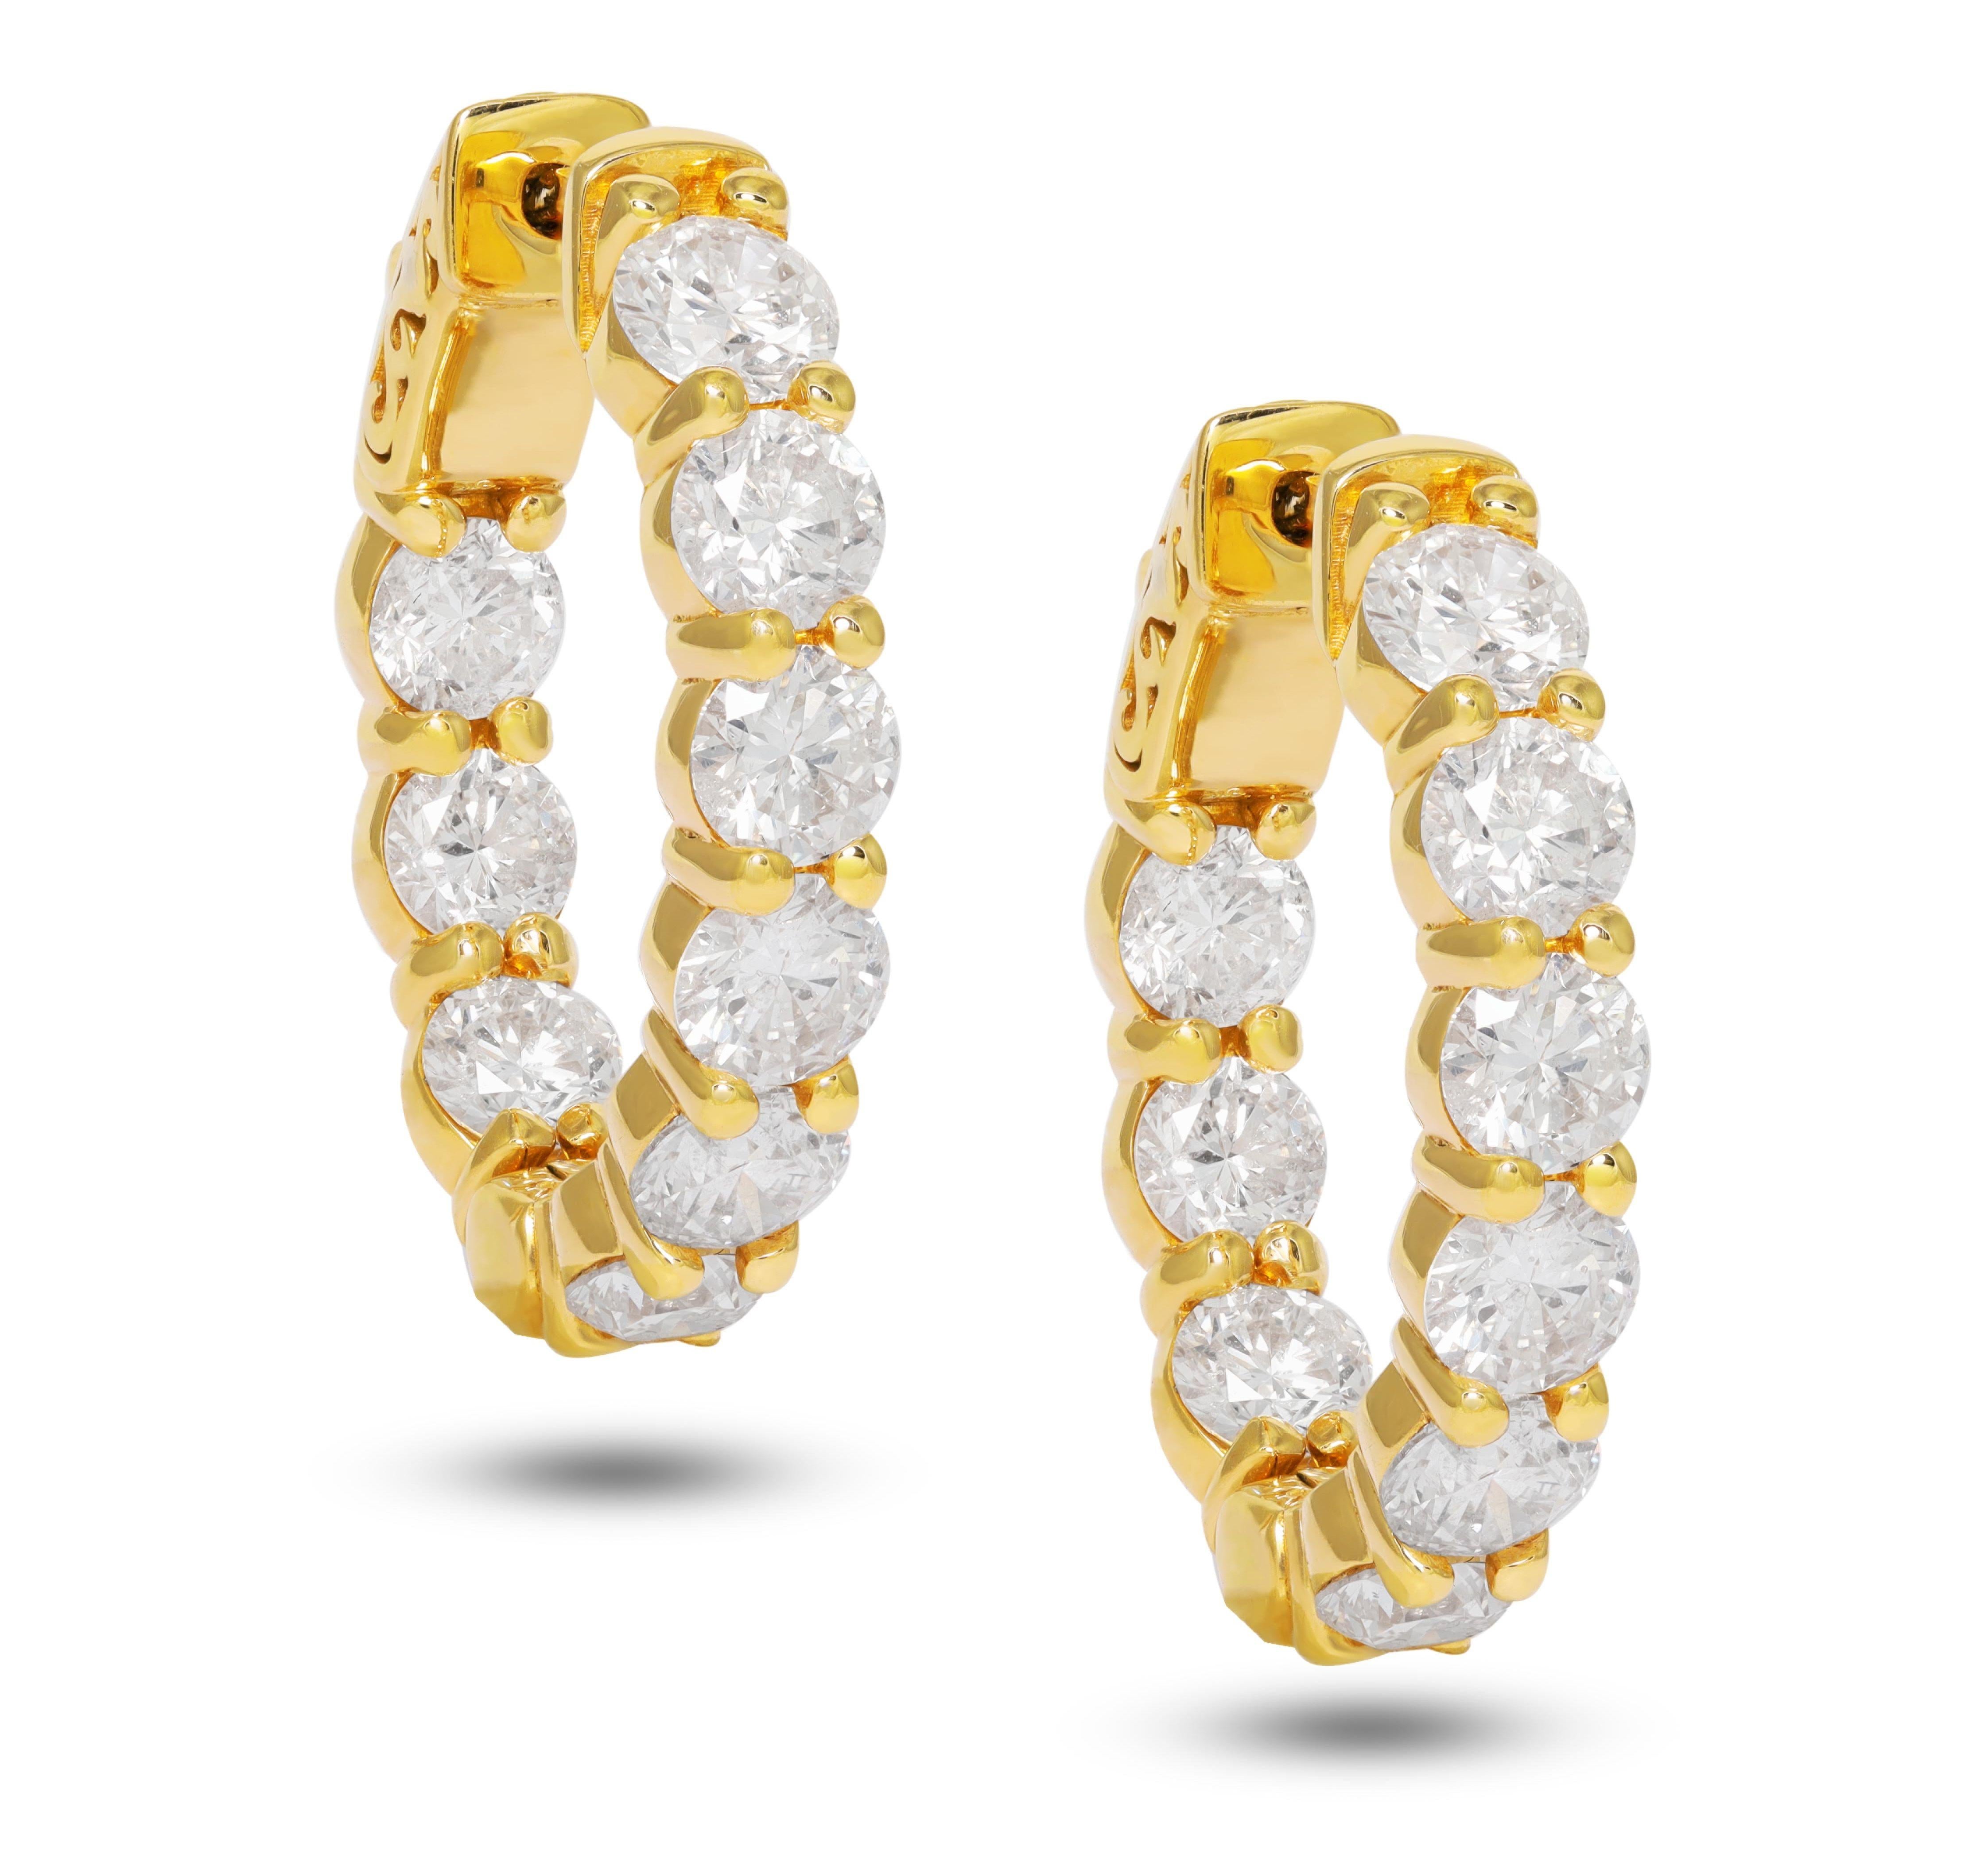 14K Yellow Gold Diamond Earrings featuring 4.50 Carats of Diamonds

Underline your look with this sharp 14K Yellow gold shape Diamond Earrings. High quality Diamonds. This Earrings will underline your exquisite look for any occasion.

. is a leading